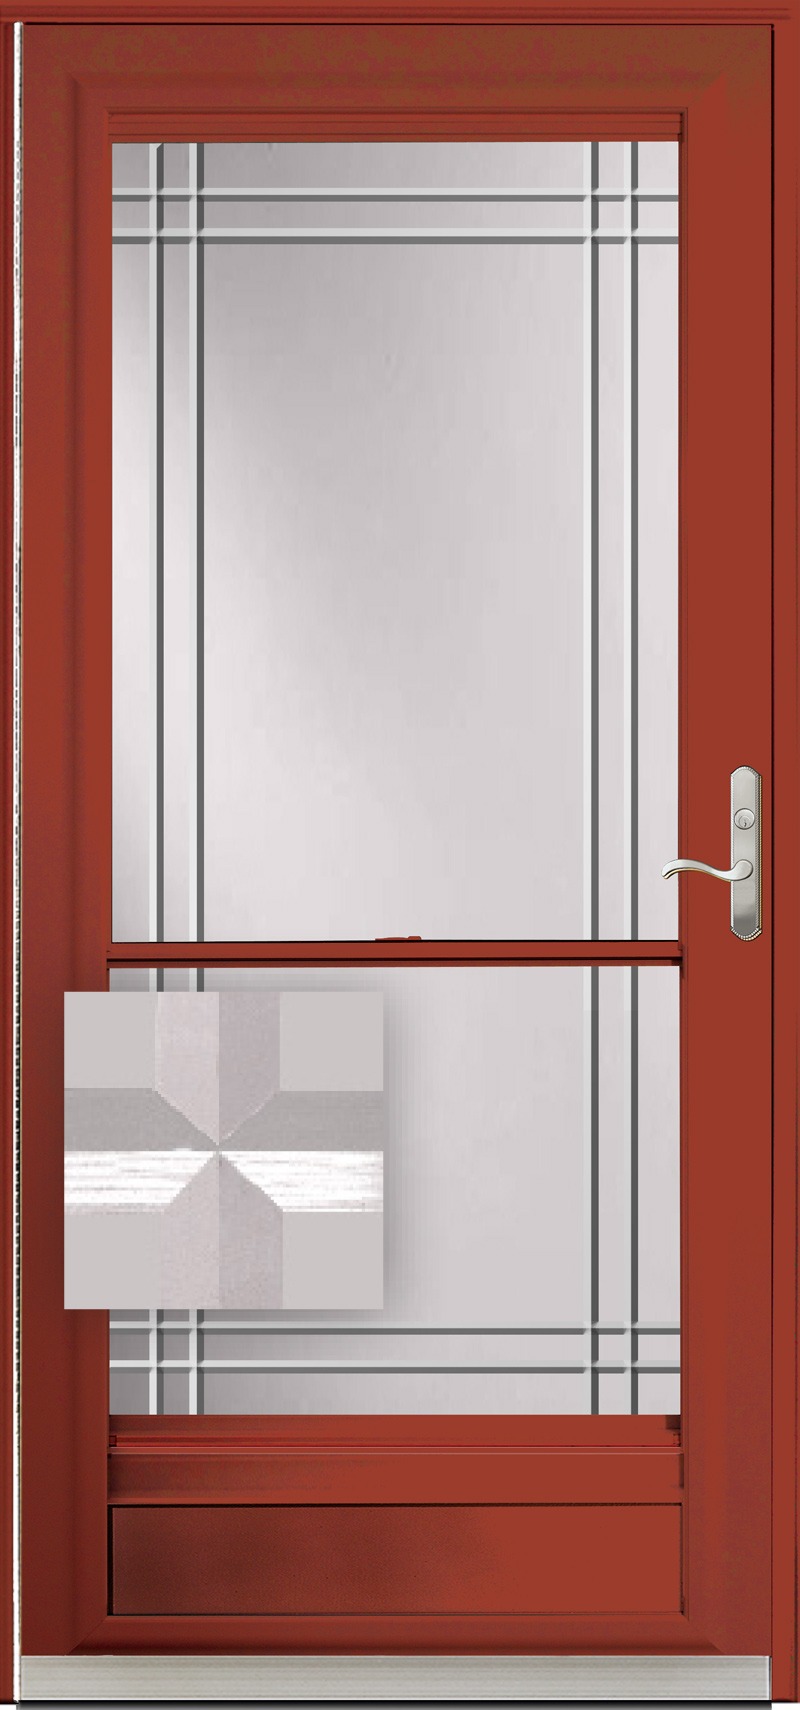 A red door with etched glass inside